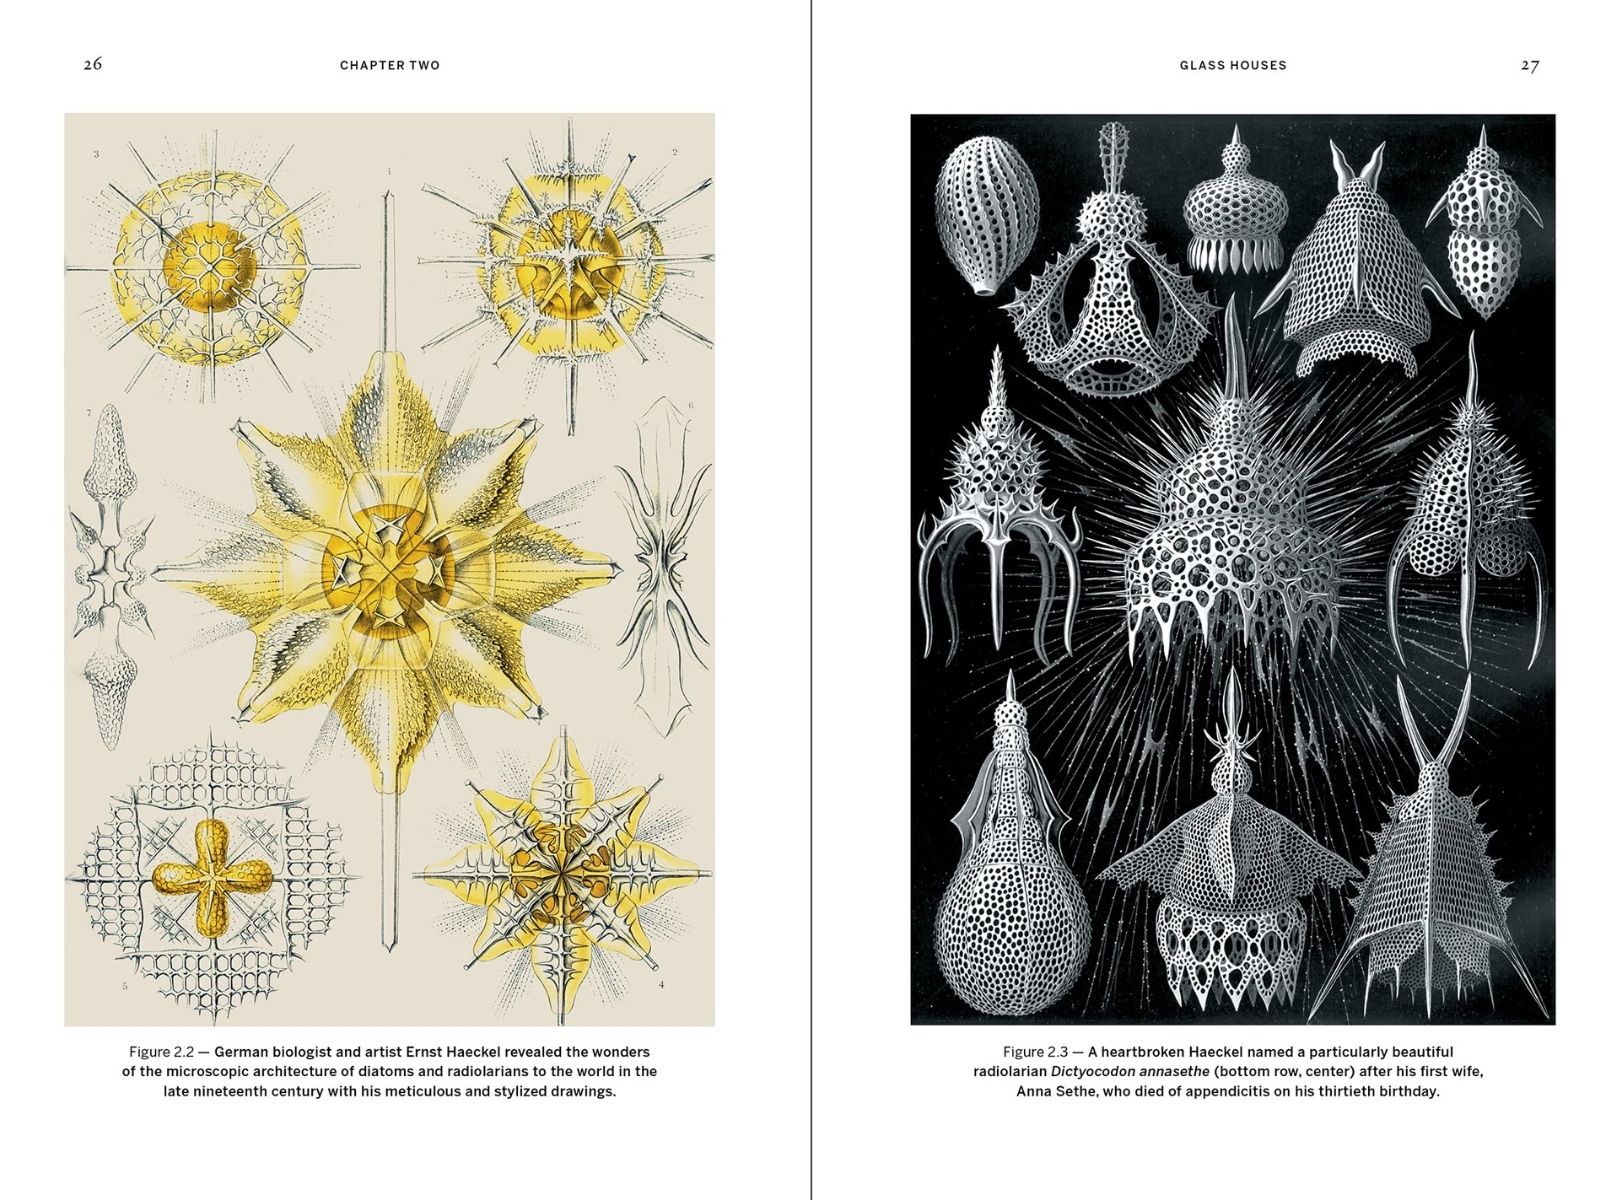 Yellow and black illustrations - wild design article - Lose Yourself in these Mesmerizing Vintage Illustrations of the Natural World - kimberley ridley on thursd